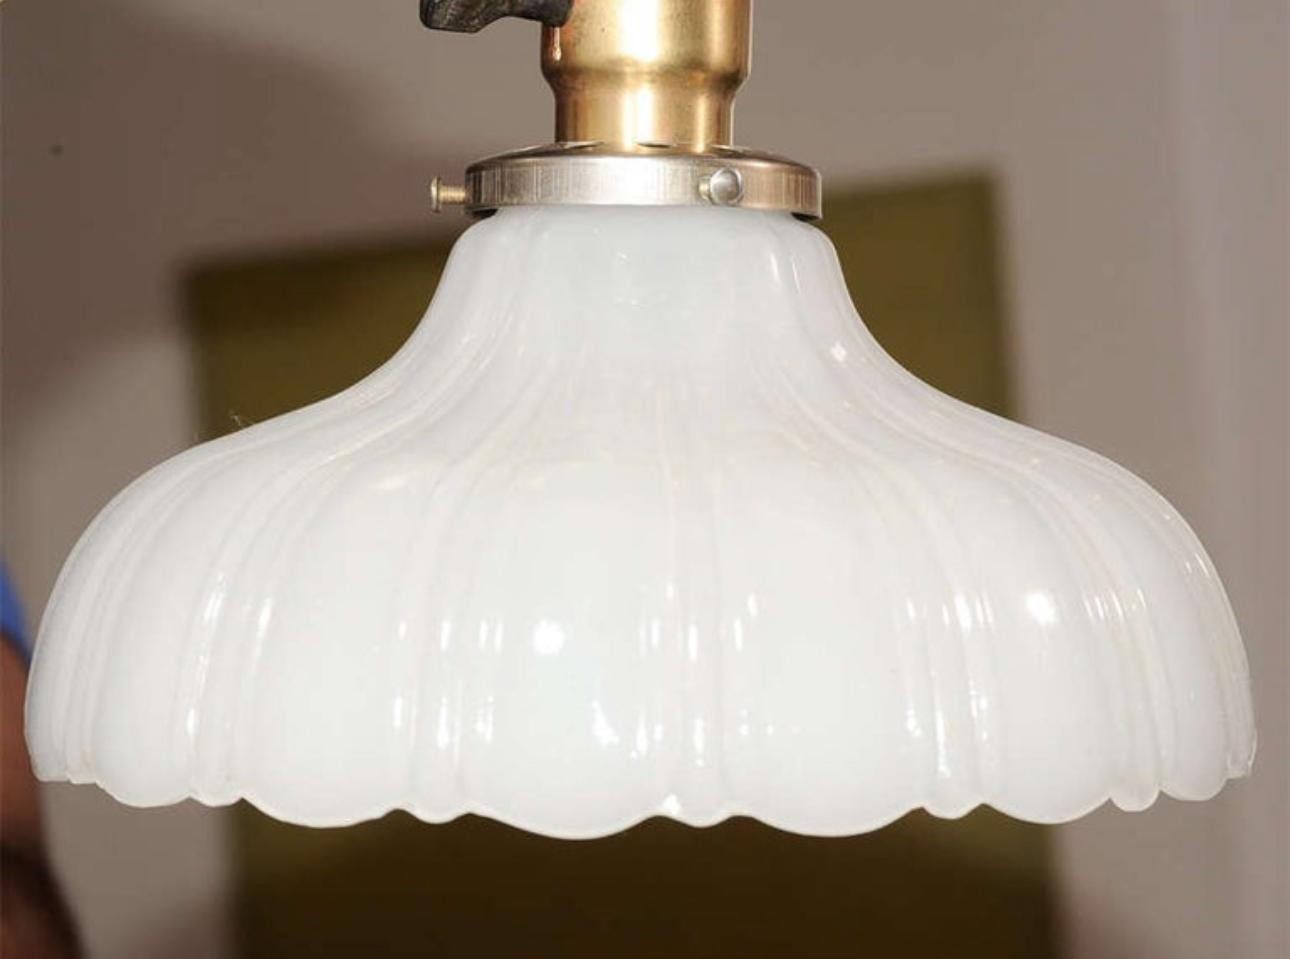 Pair of Vintage Scalloped Milk Glass & Brass Wall Sconces In Good Condition For Sale In New York, NY